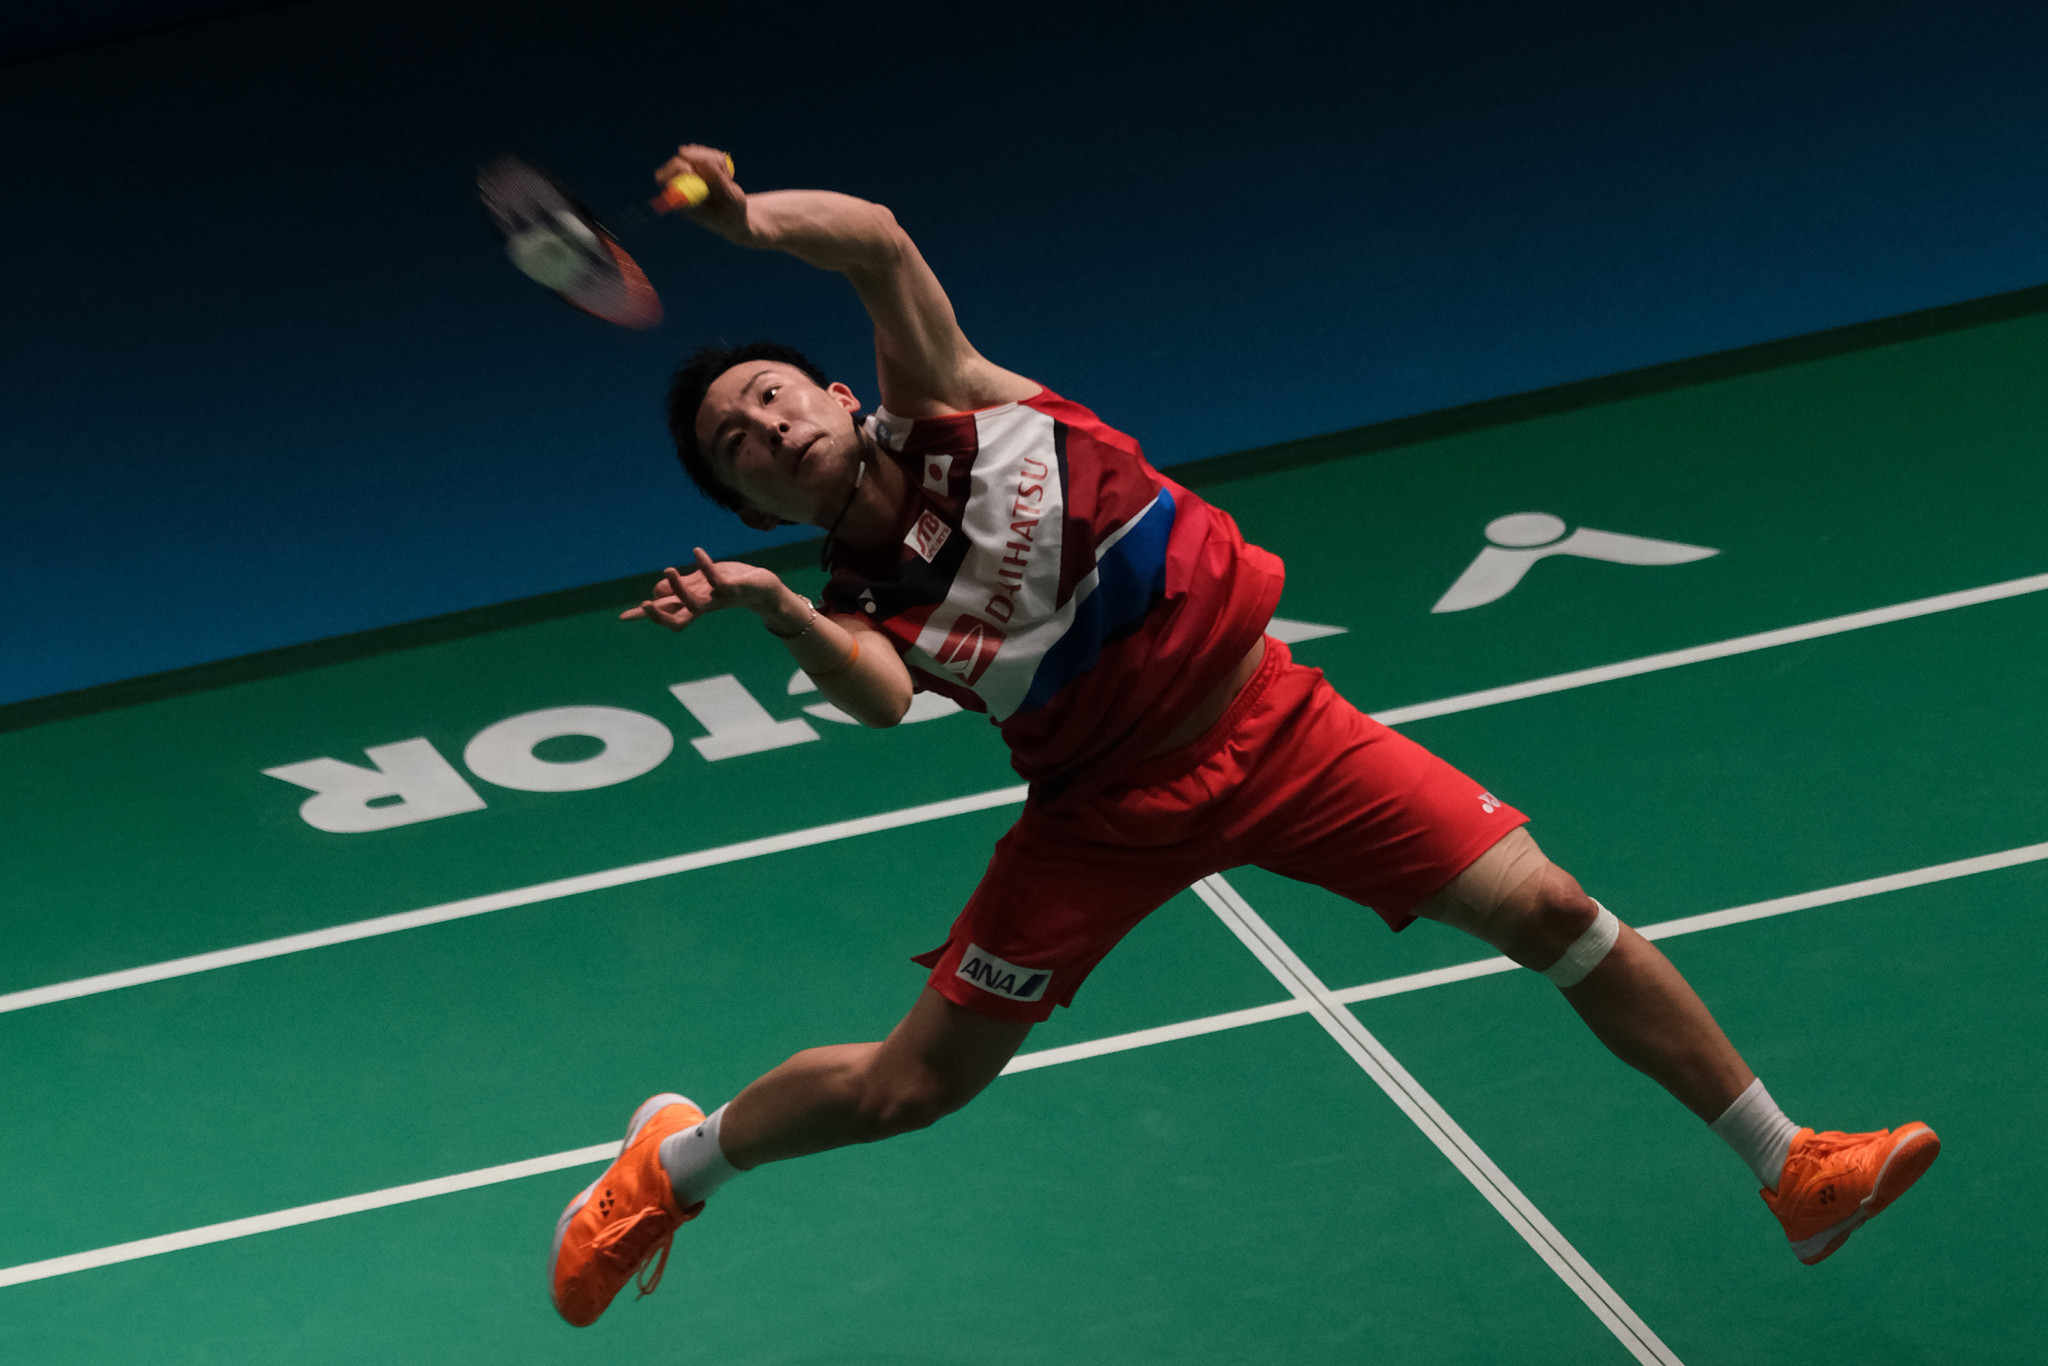 Japan's world number one Kento Momota came through a close first round match at the BWF Singapore Open ©Getty Images